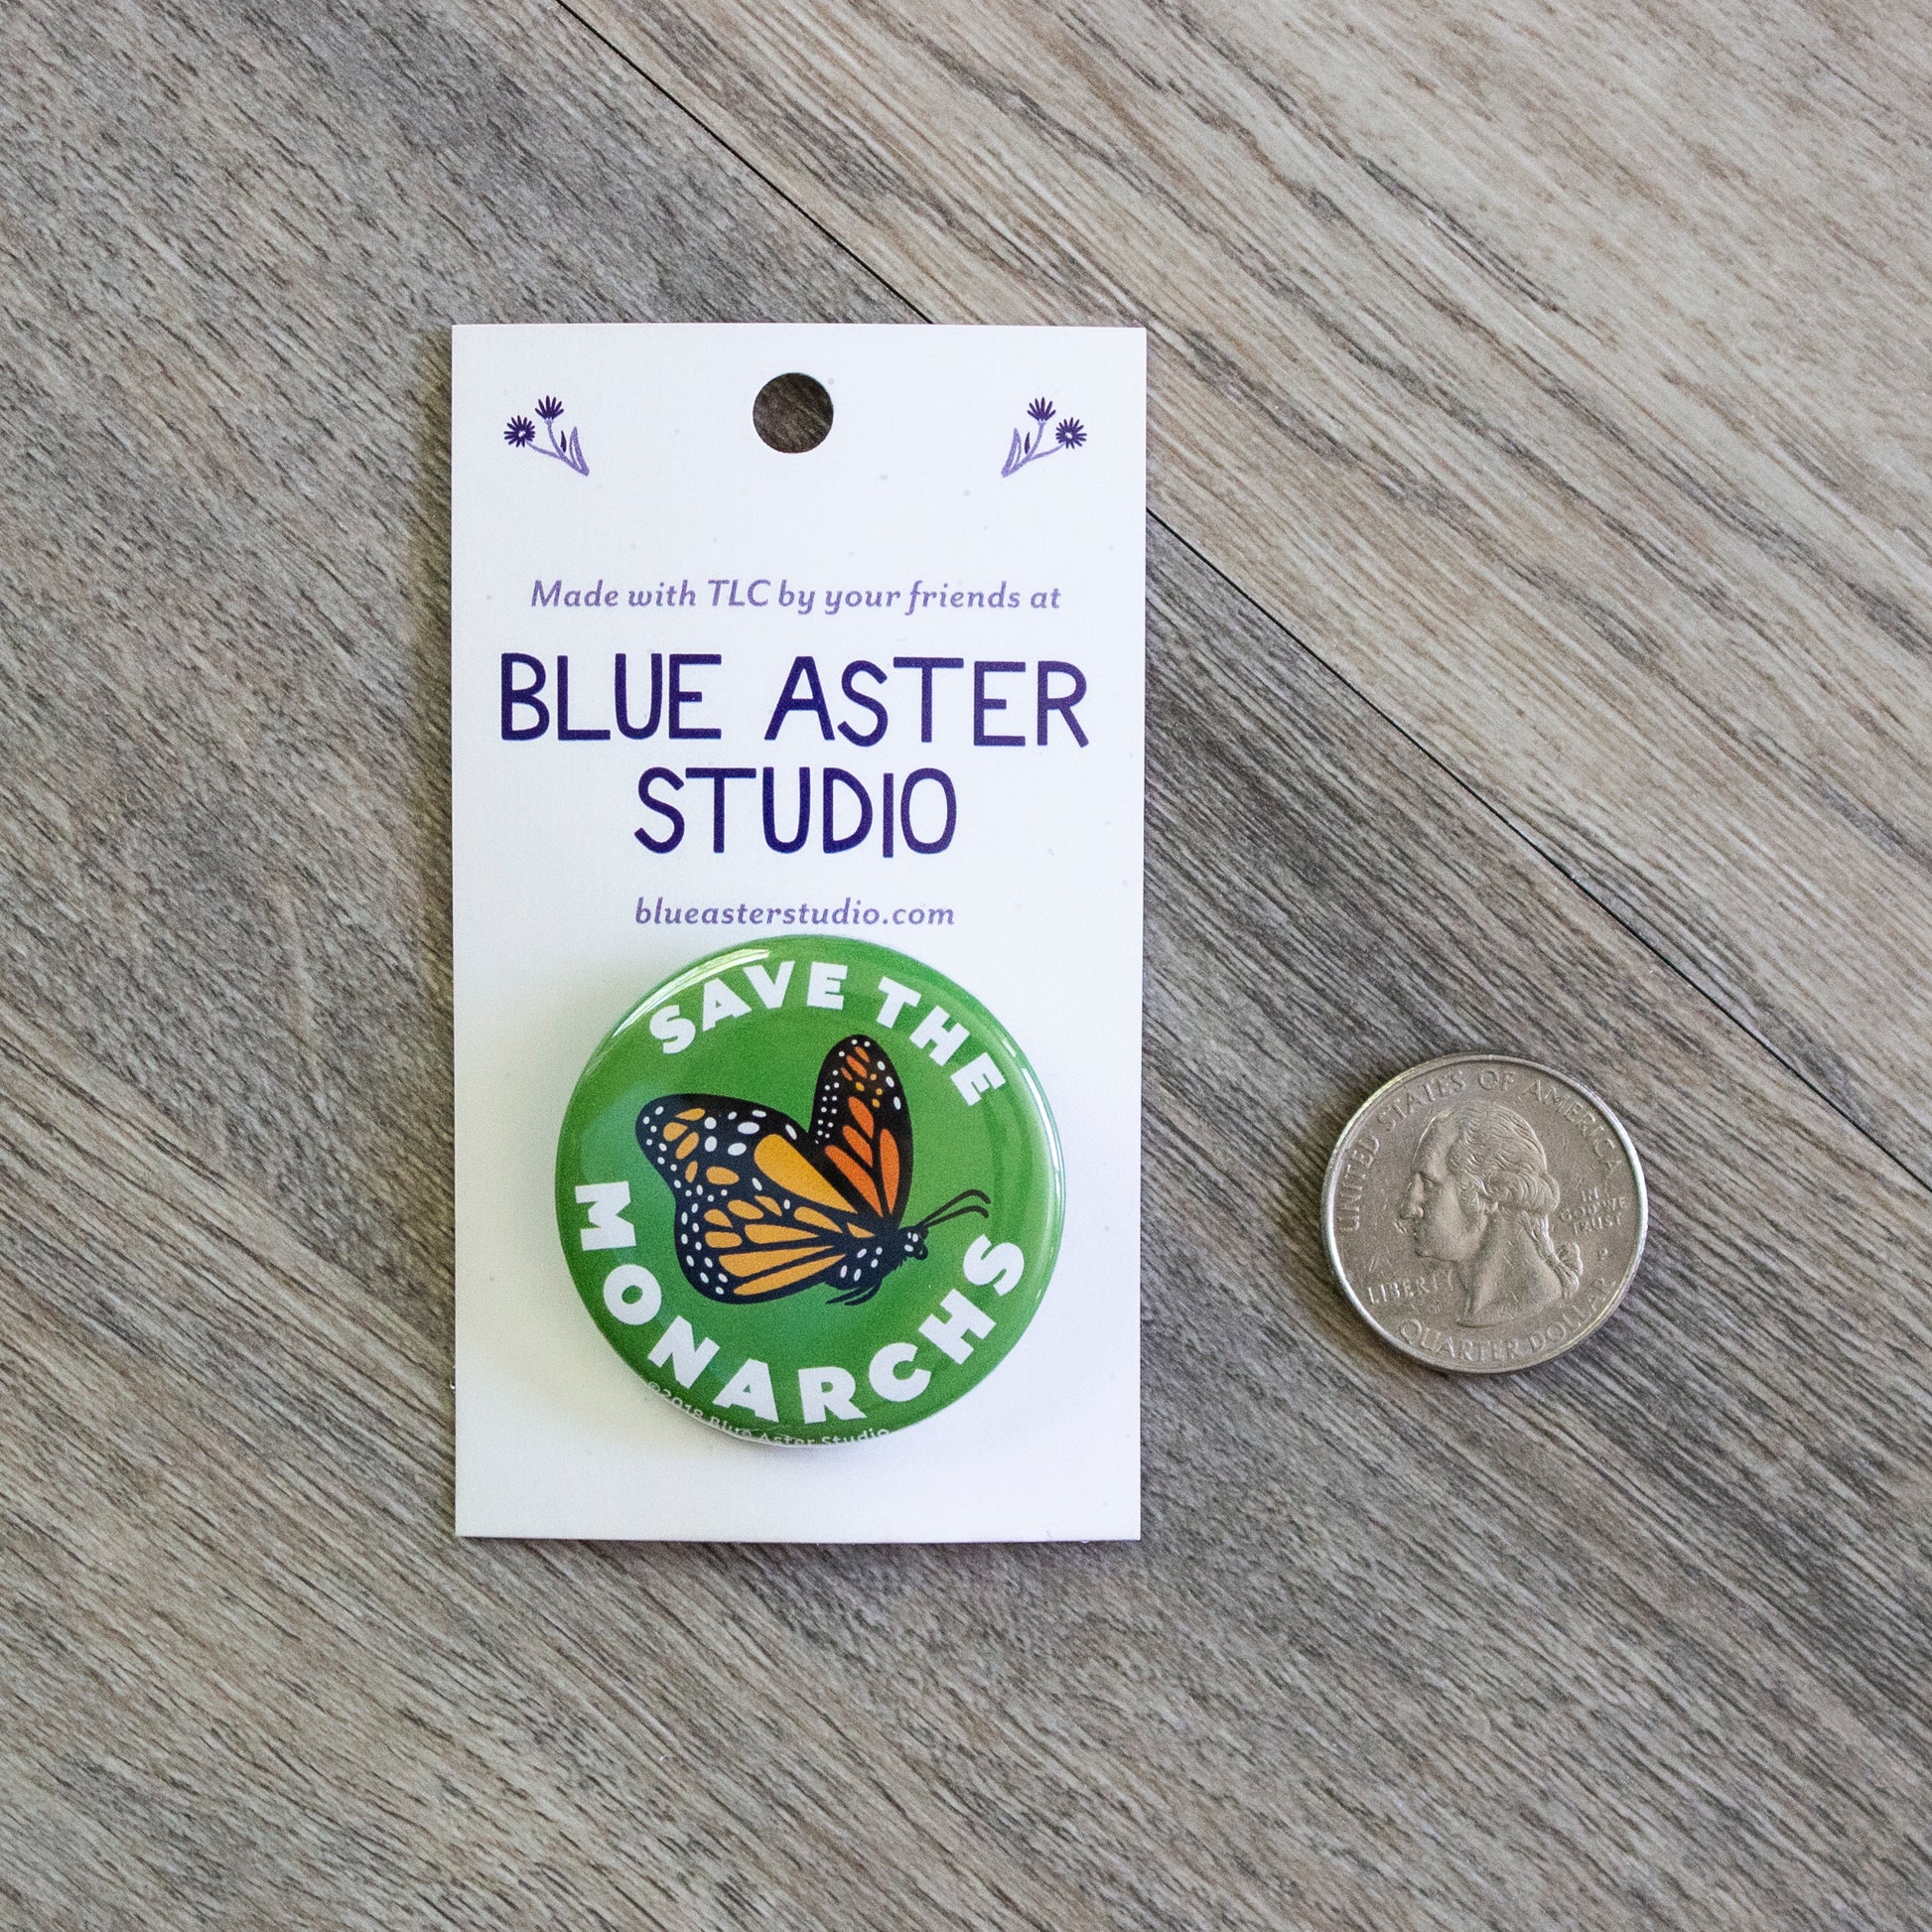 A 1.5 inch green pinback button with an illustration of a monarch butterfly in flight and the words Save The Monarchs. A US quarter is next to the button for scale.